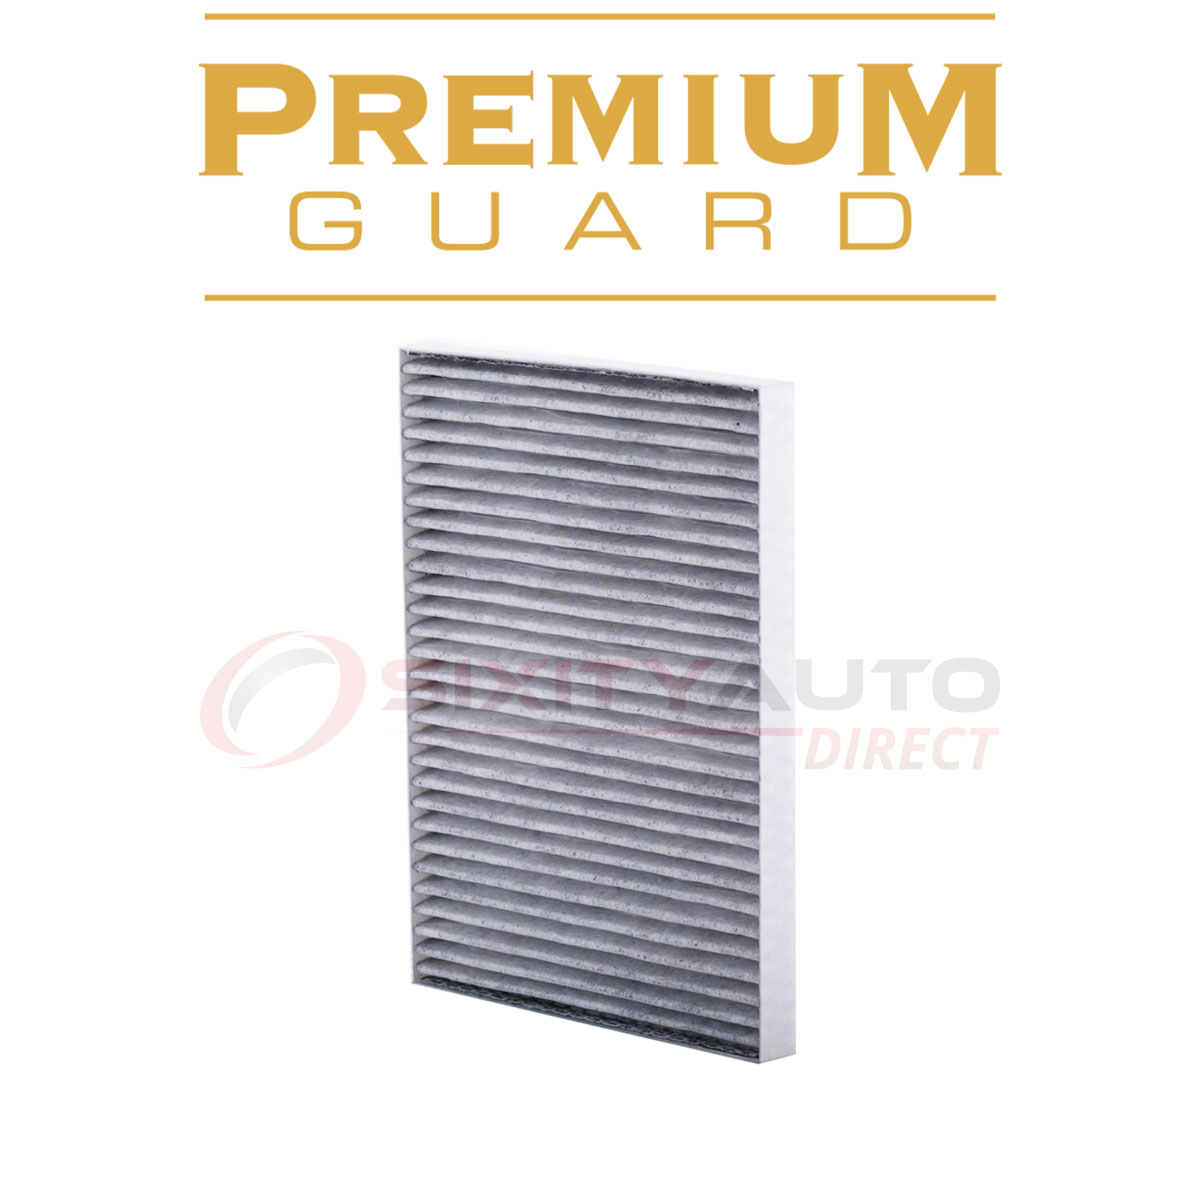 Pronto Cabin Air Filter for 2017 GMC Acadia Limited - HVAC Heating zv | eBay 2017 Gmc Acadia Limited Cabin Air Filter